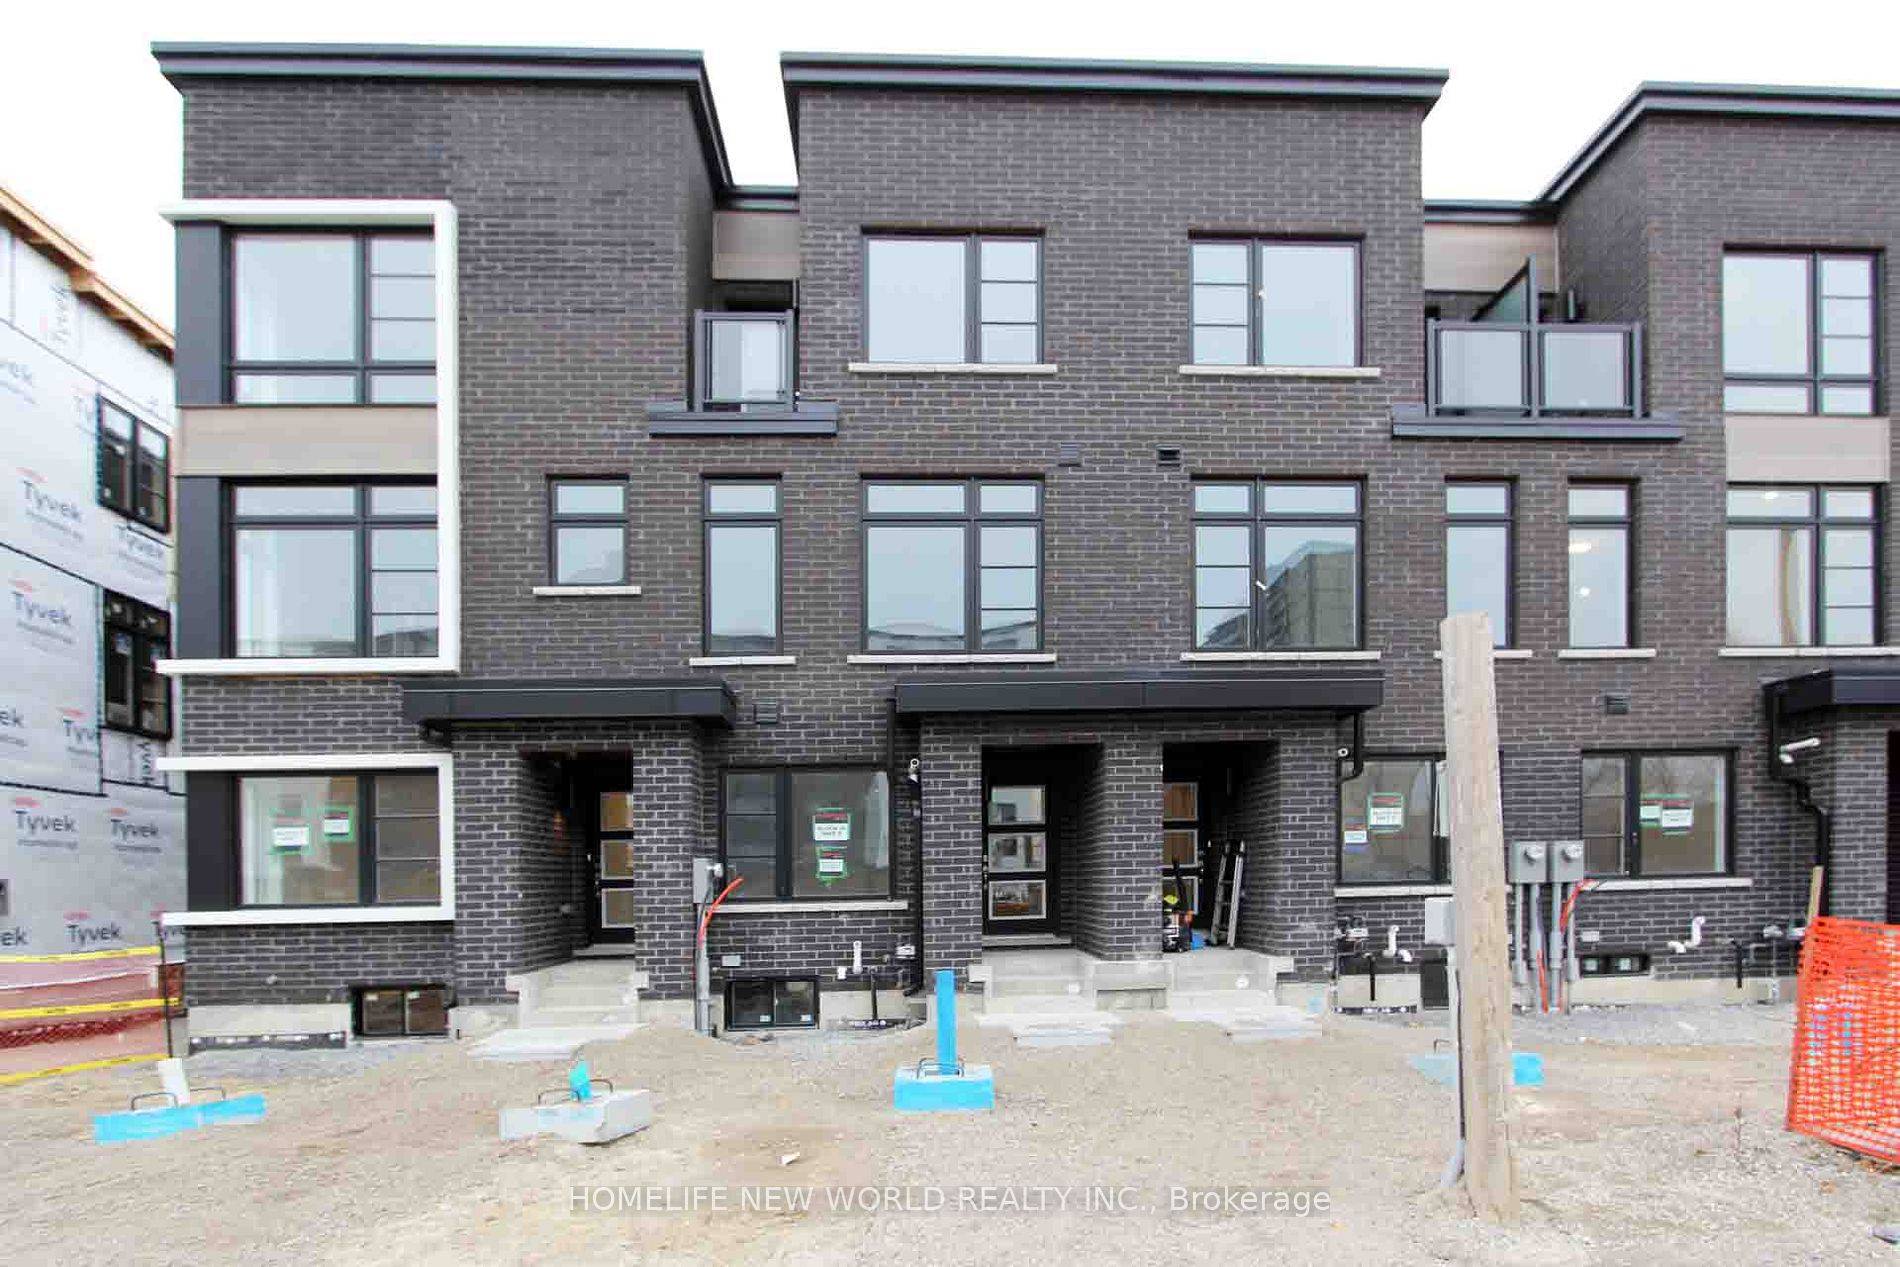 Luxurious Brand New 1787 SQFT three story freehold Townhouse.